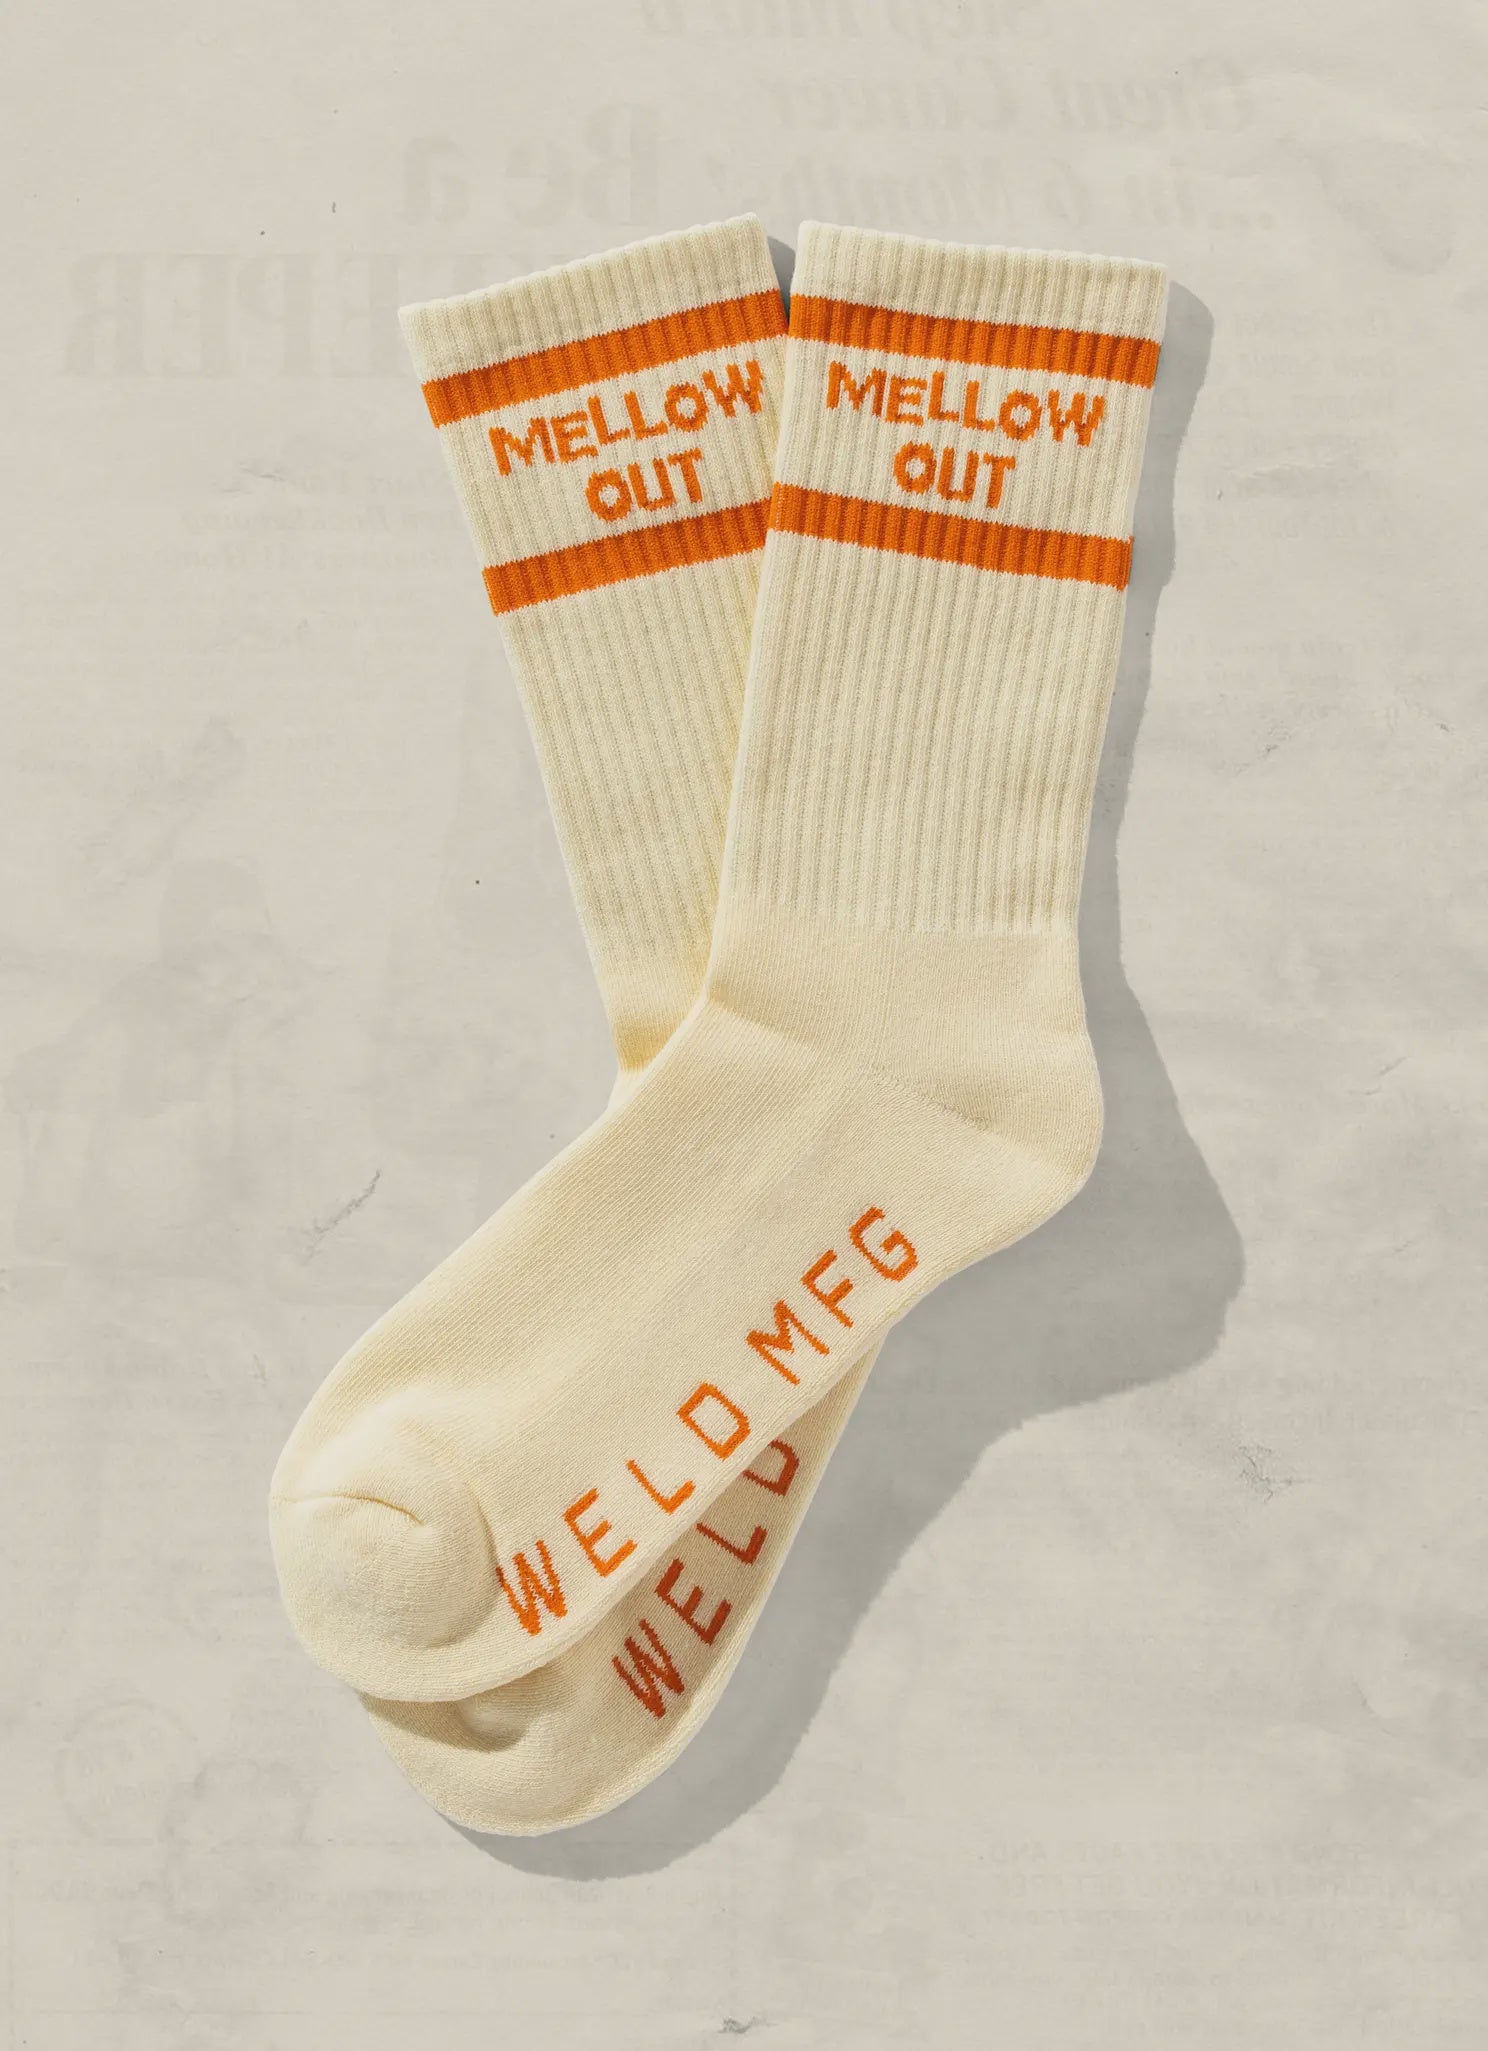 The Mellow Out Socks by Weld Mfg